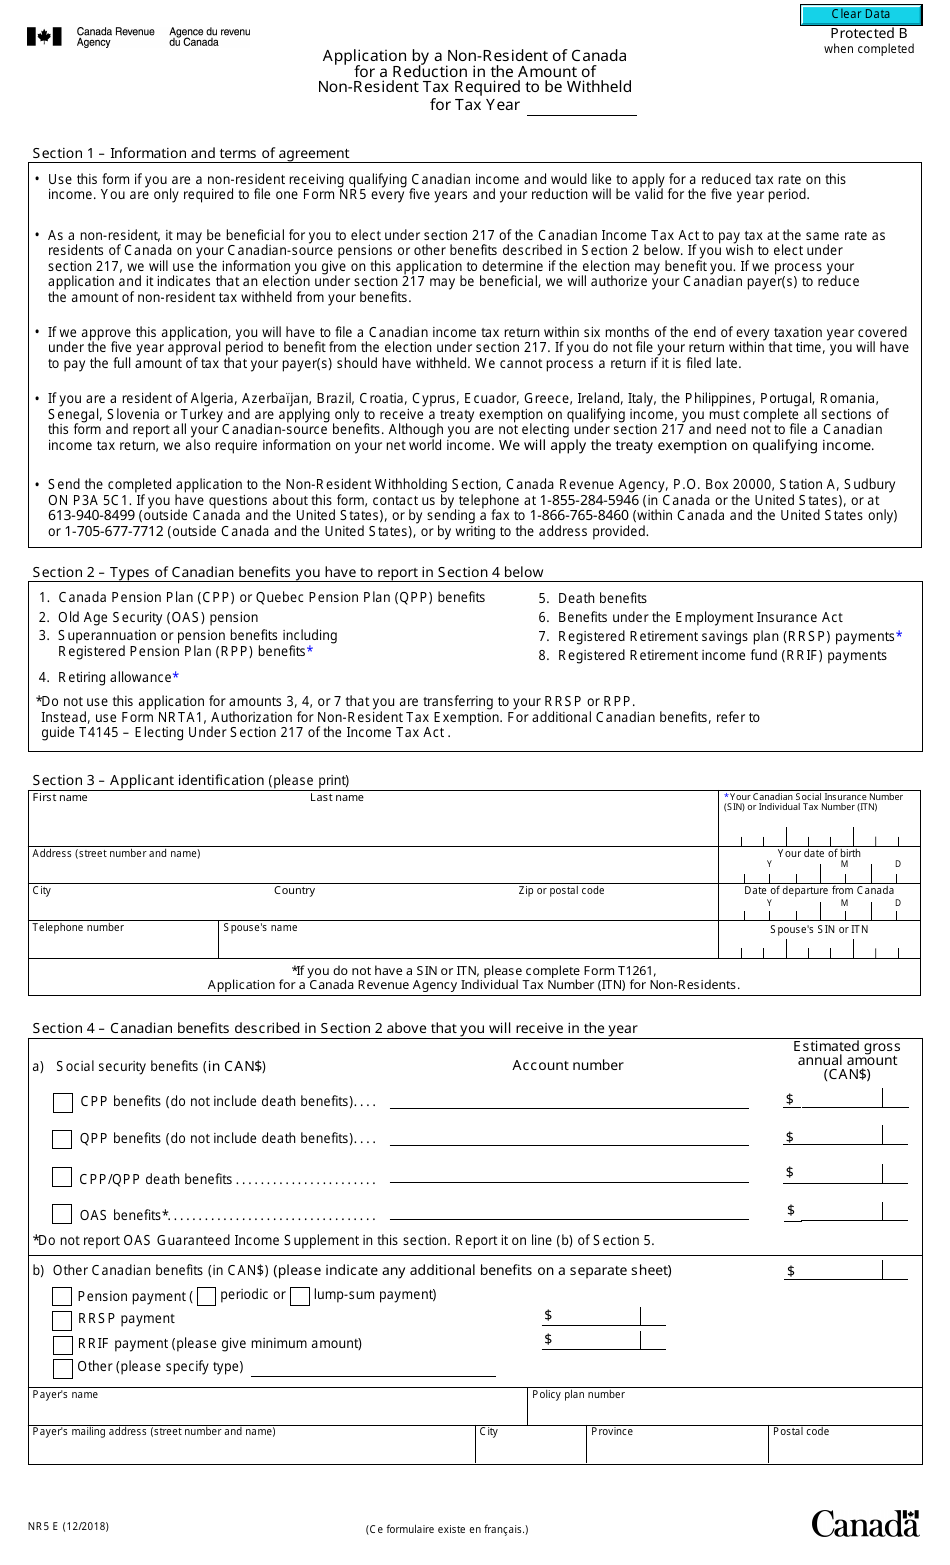 Form NR5 Application by a Non-resident of Canada for a Reduction in the Amount of Non-resident Tax Required to Be Withheld for Tax Year - Canada, Page 1